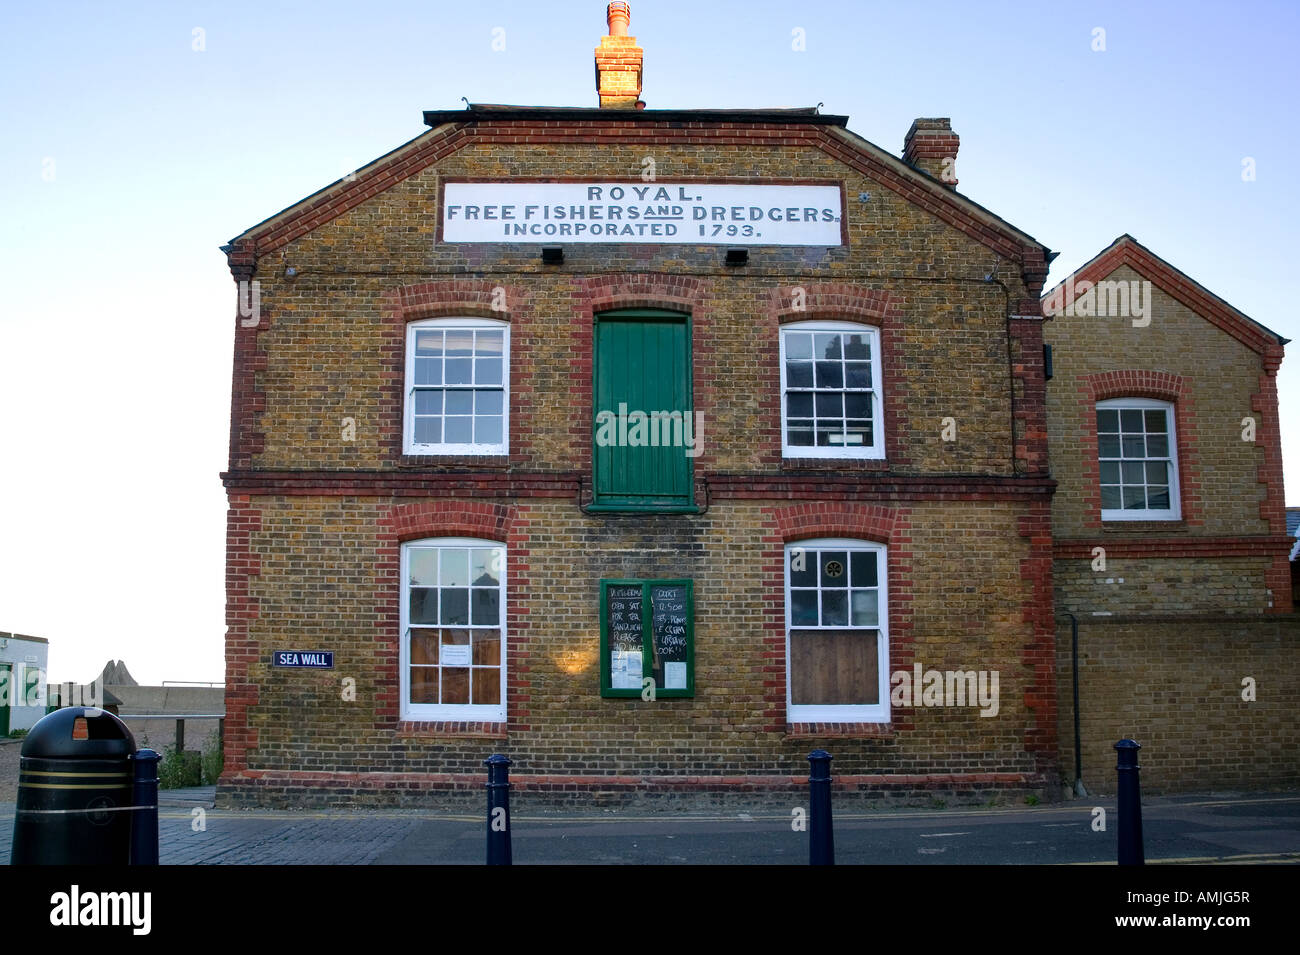 Royal Free Fishers and Dredgers Building Whitstable Kent England Stock Photo